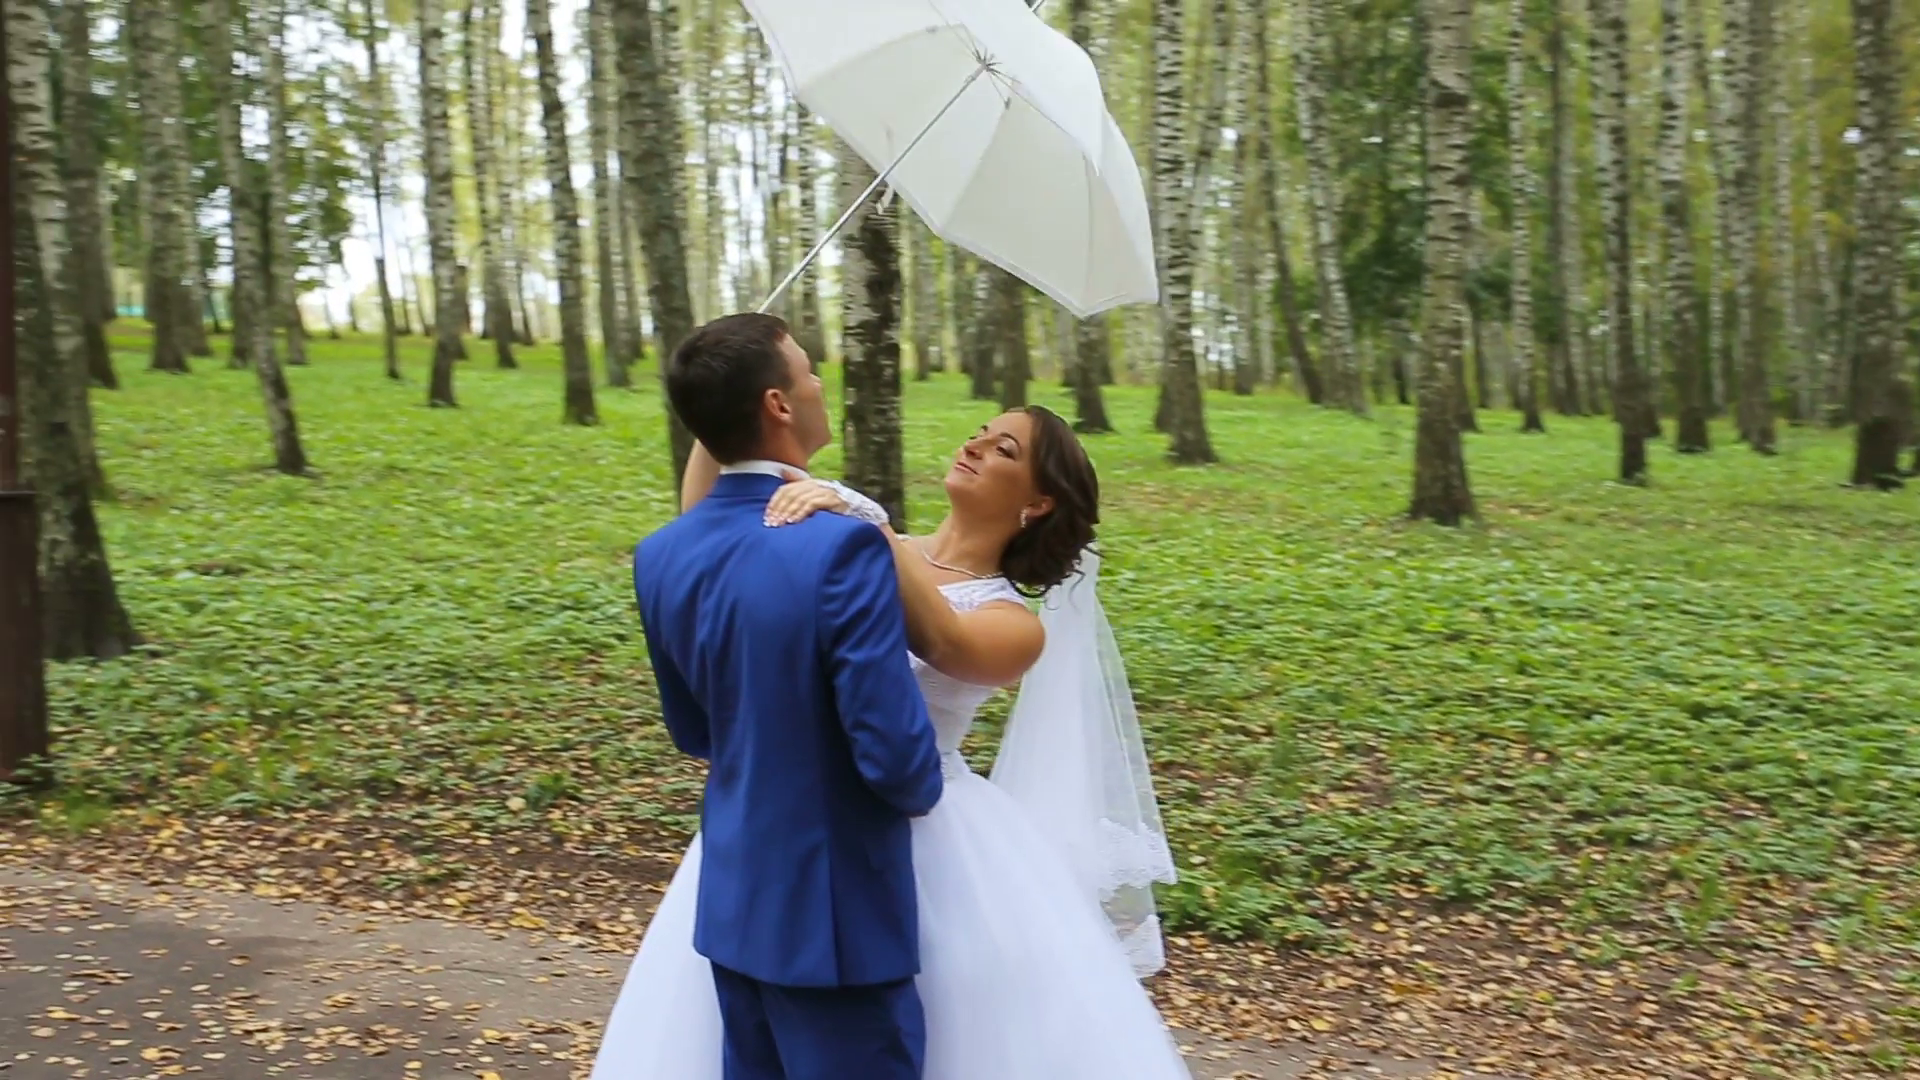 Newlyweds in a park with white umbrella.Wedding concept. Happy ...